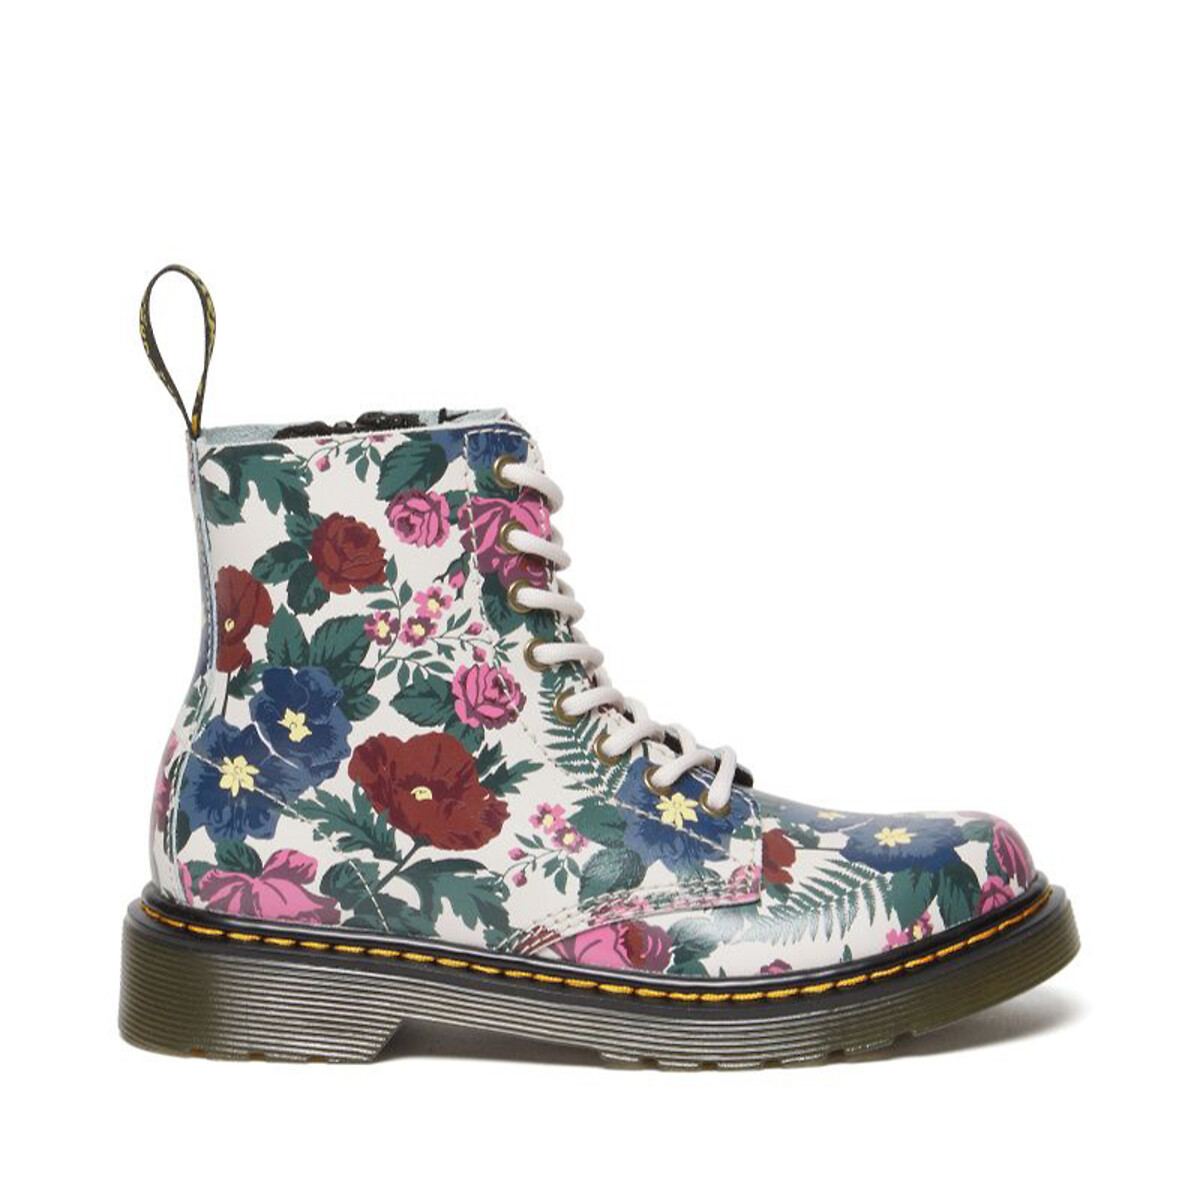 Image of Kids 1460 Ankle Boots in Floral Print Leather